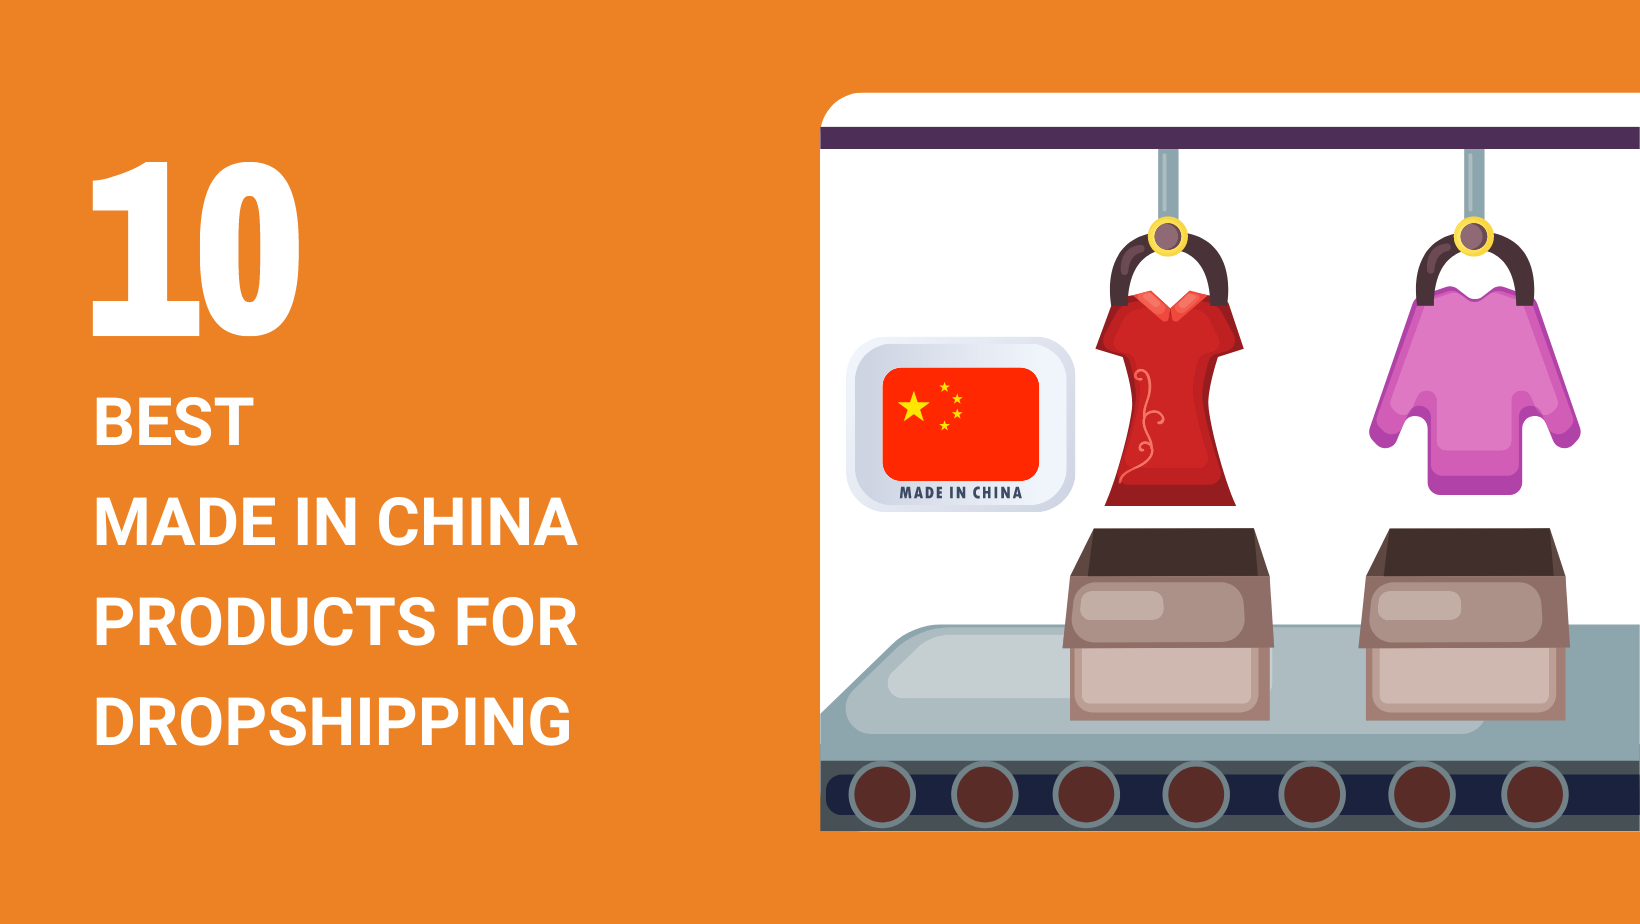 10 Best Made in China Products for Dropshipping in 2022 - Dropshipping ...